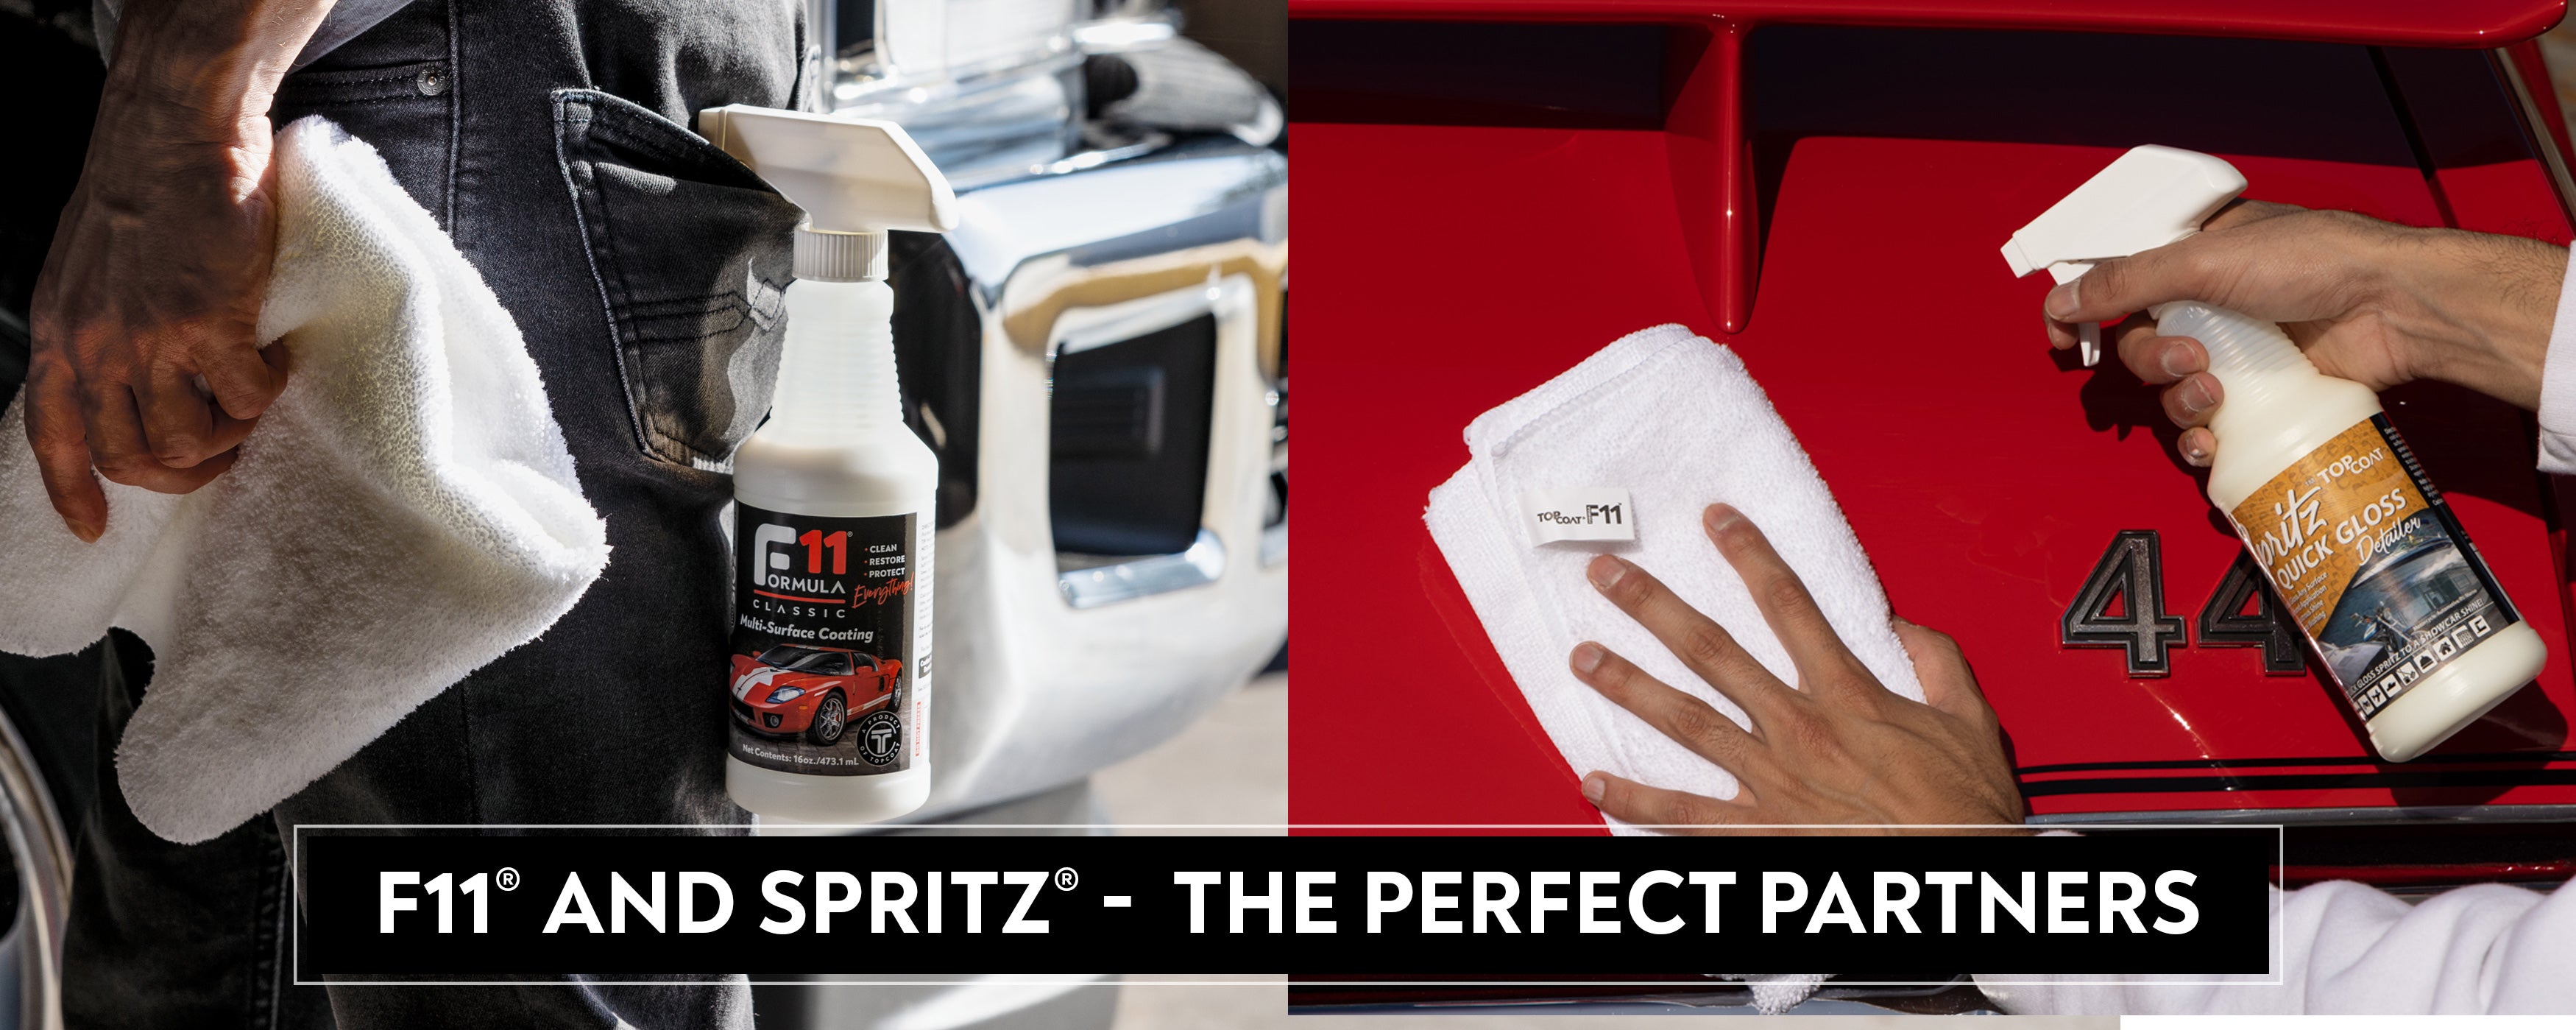 Why Spritz™ is the Perfect Partner for F11®